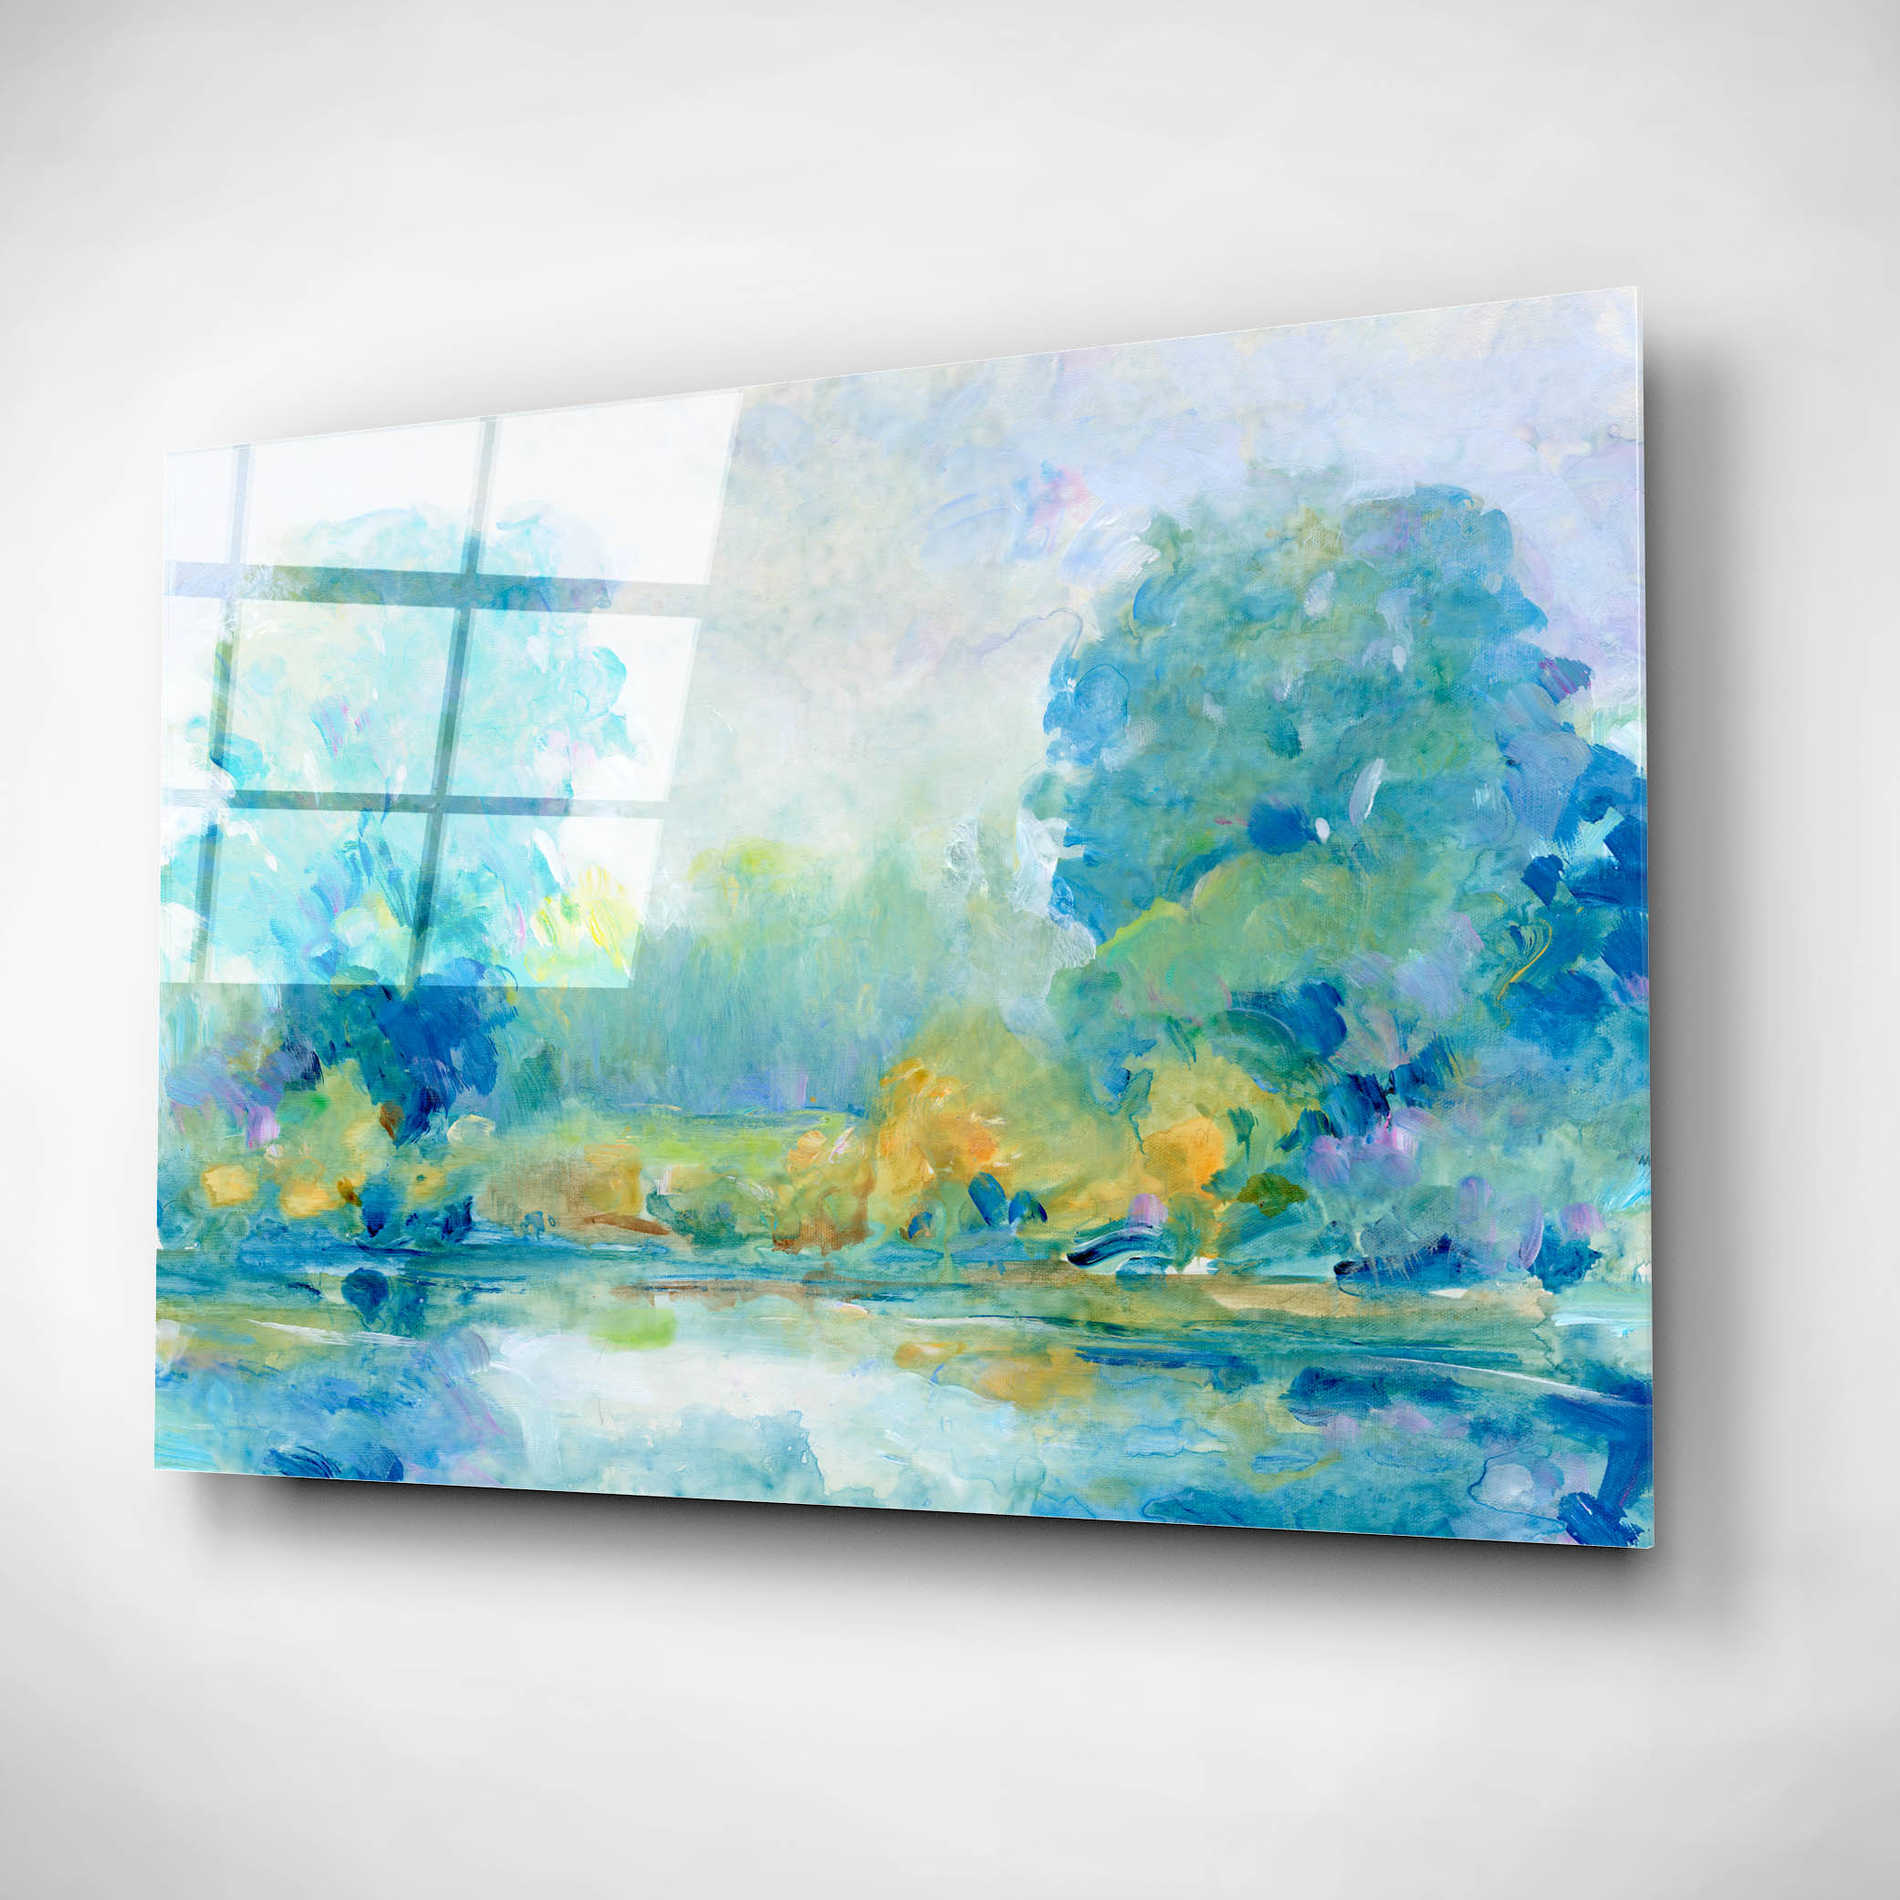 Epic Art 'Quiet Morning I' by Tim O'Toole, Acrylic Glass Wall Art,24x16